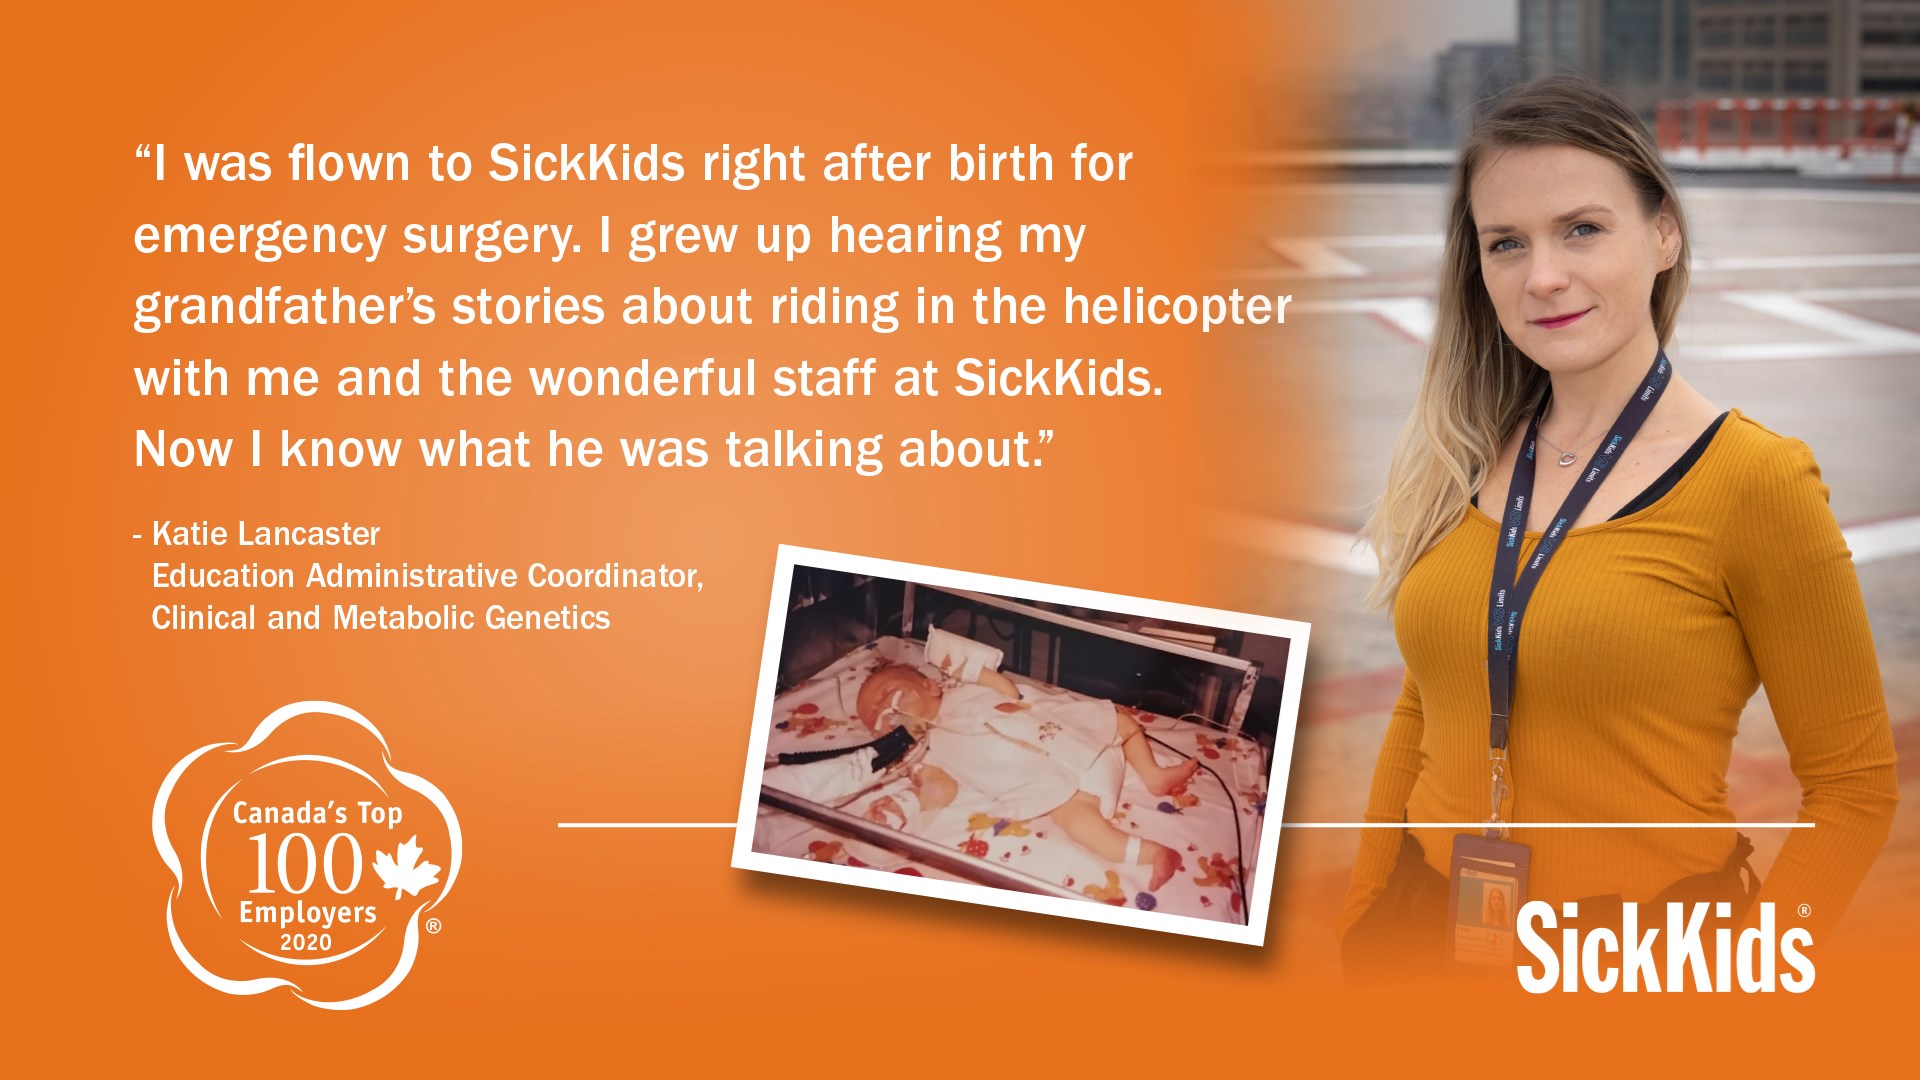 Katie Lancaster as a baby and as a staff member at SickKids now. Katie's quote reads "I was flown to SickKids right after birth for emergency surgery. I grew up hearing my grandfather's stories about riding in the helicopter with me and the wonderful staff at SickKids. Now I know what he was talking about."